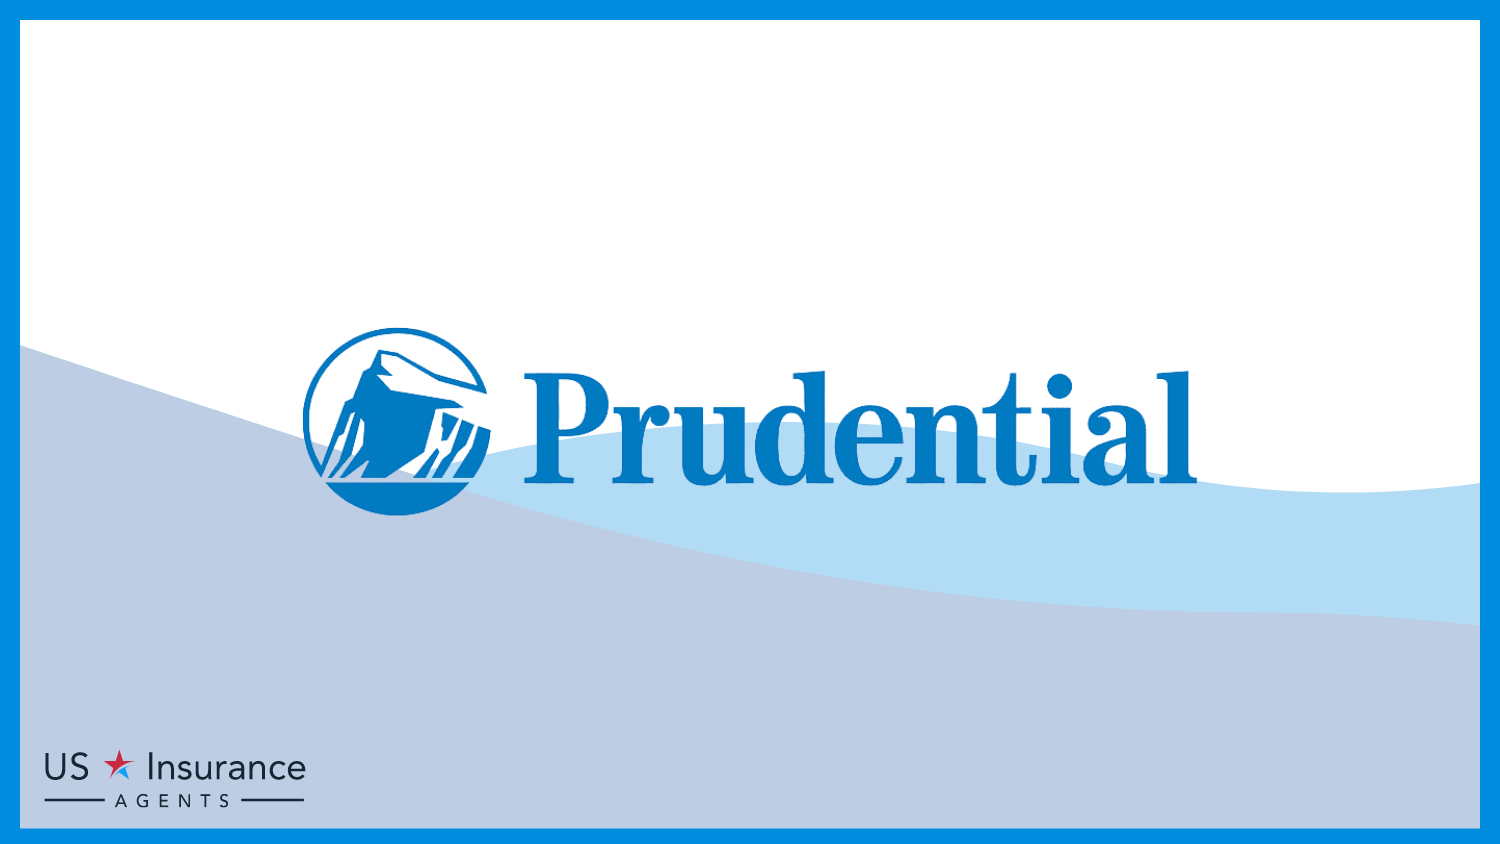 Prudential: Best Life Insurance for Motorcycle Riders